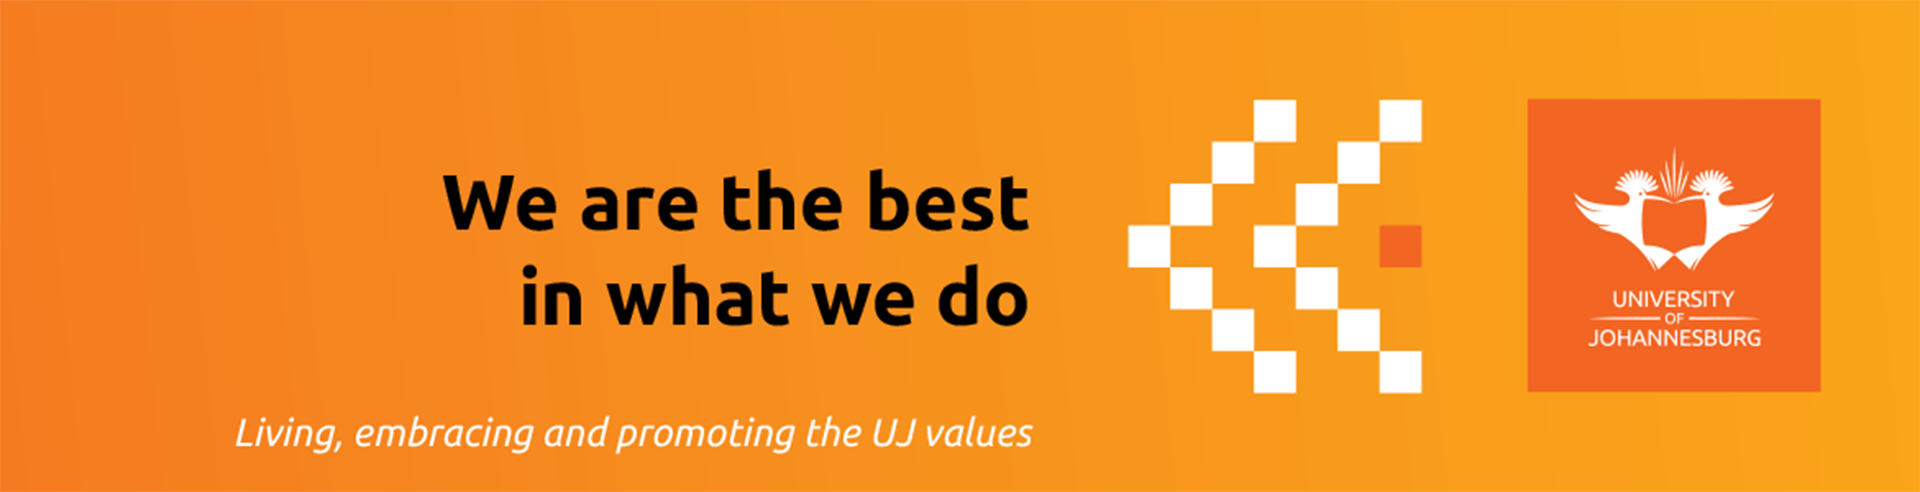 Uj Values Expressions Posters 2020 Ulink 1170x300mm 34